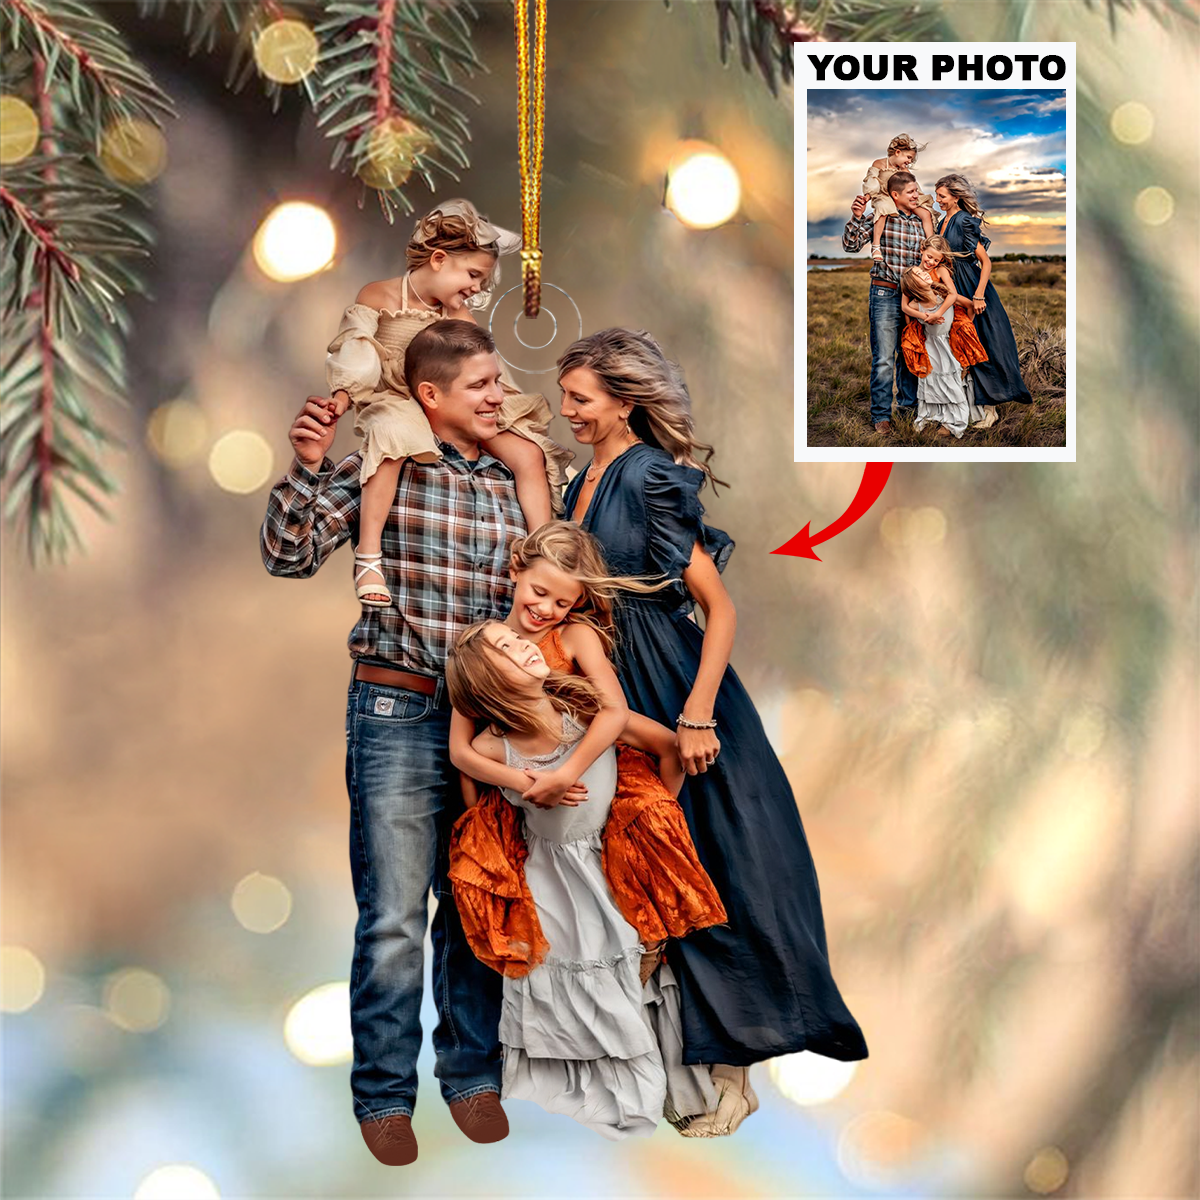 Our Family V39 - Personalized Photo Mica Ornament - Christmas Gift For Family Members